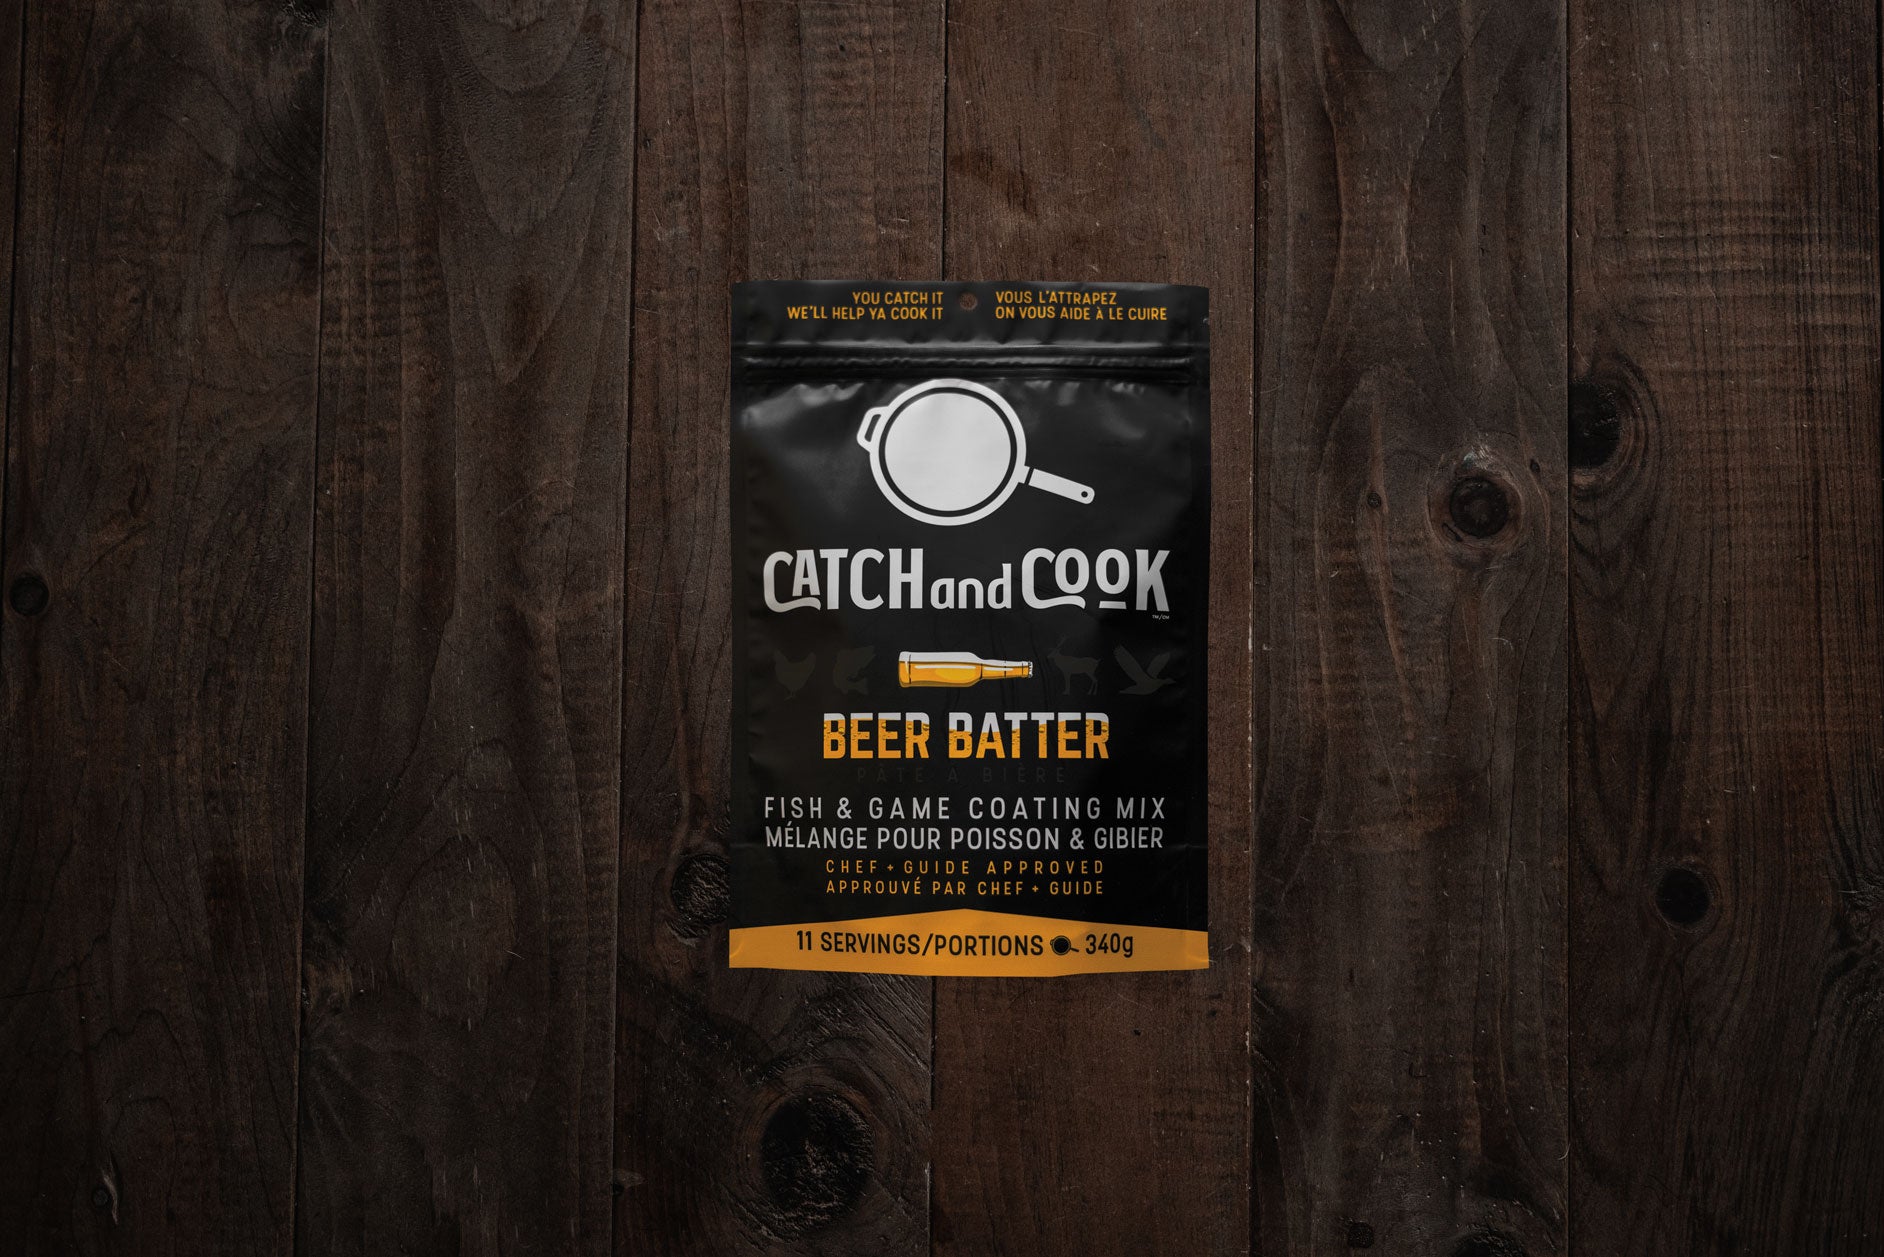 Catch and Cook Beer Batter